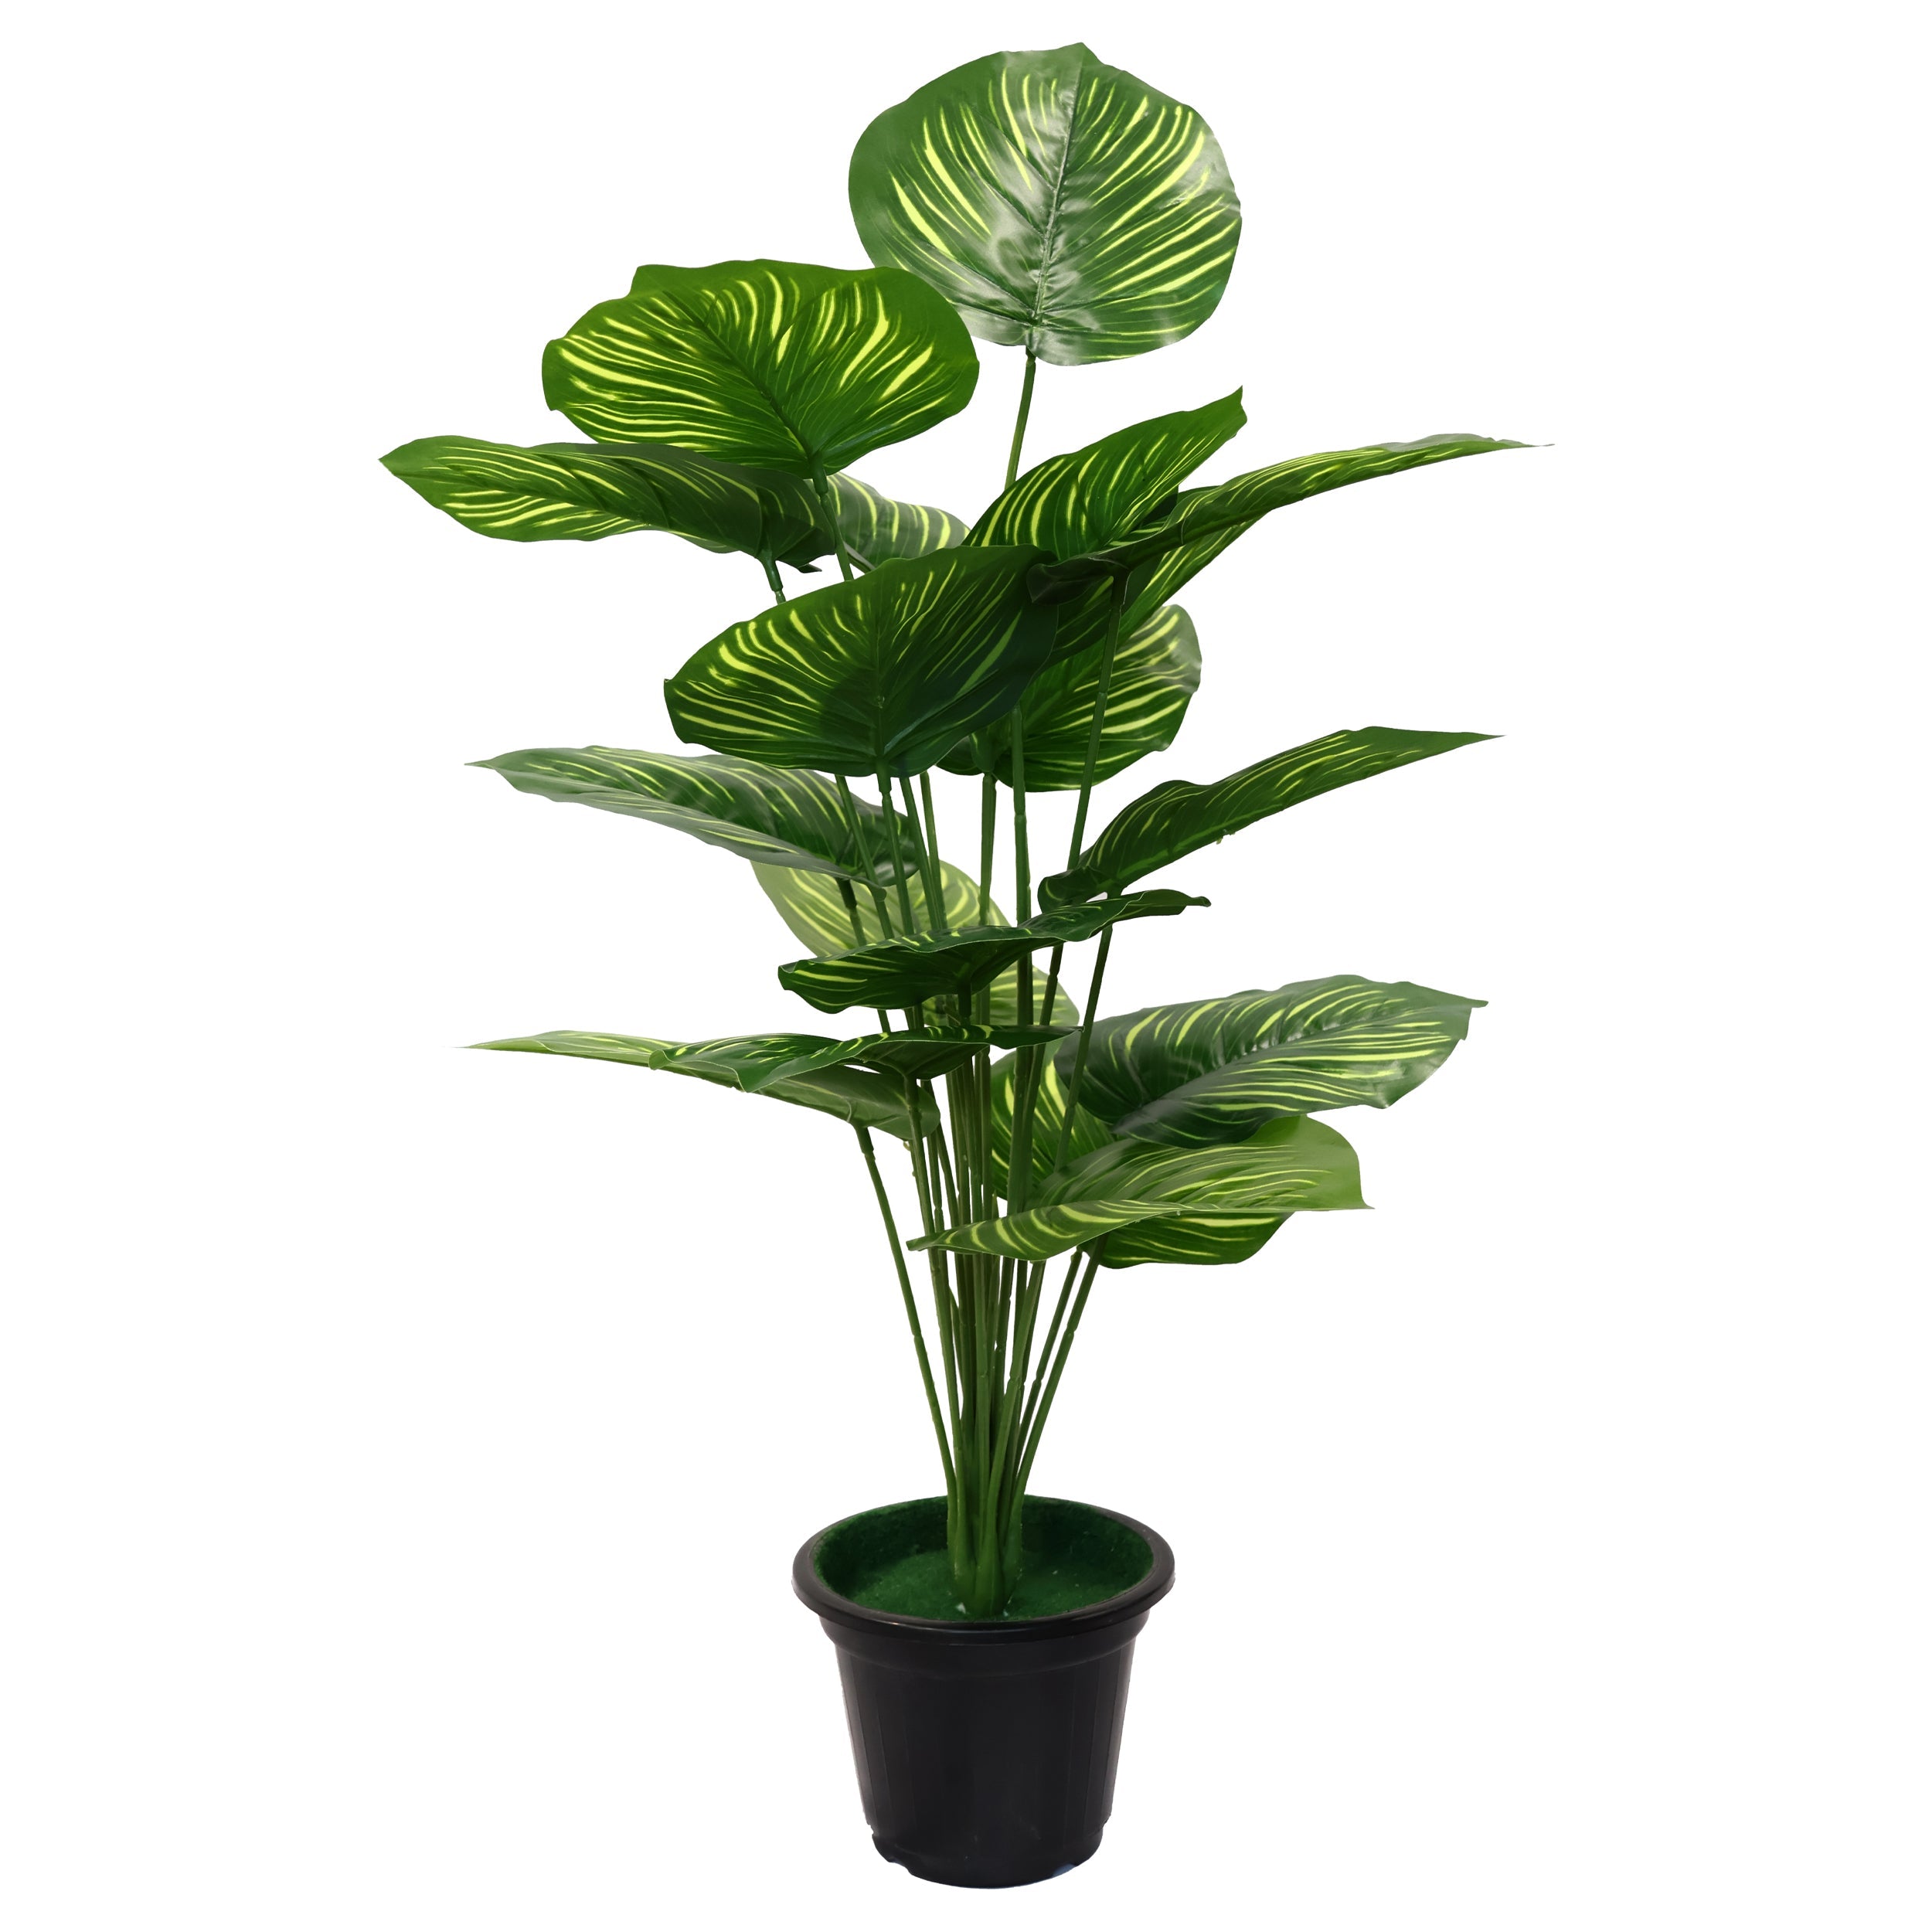 Aavana Greens 30" Artificial Philodendron Plant Pack of 2